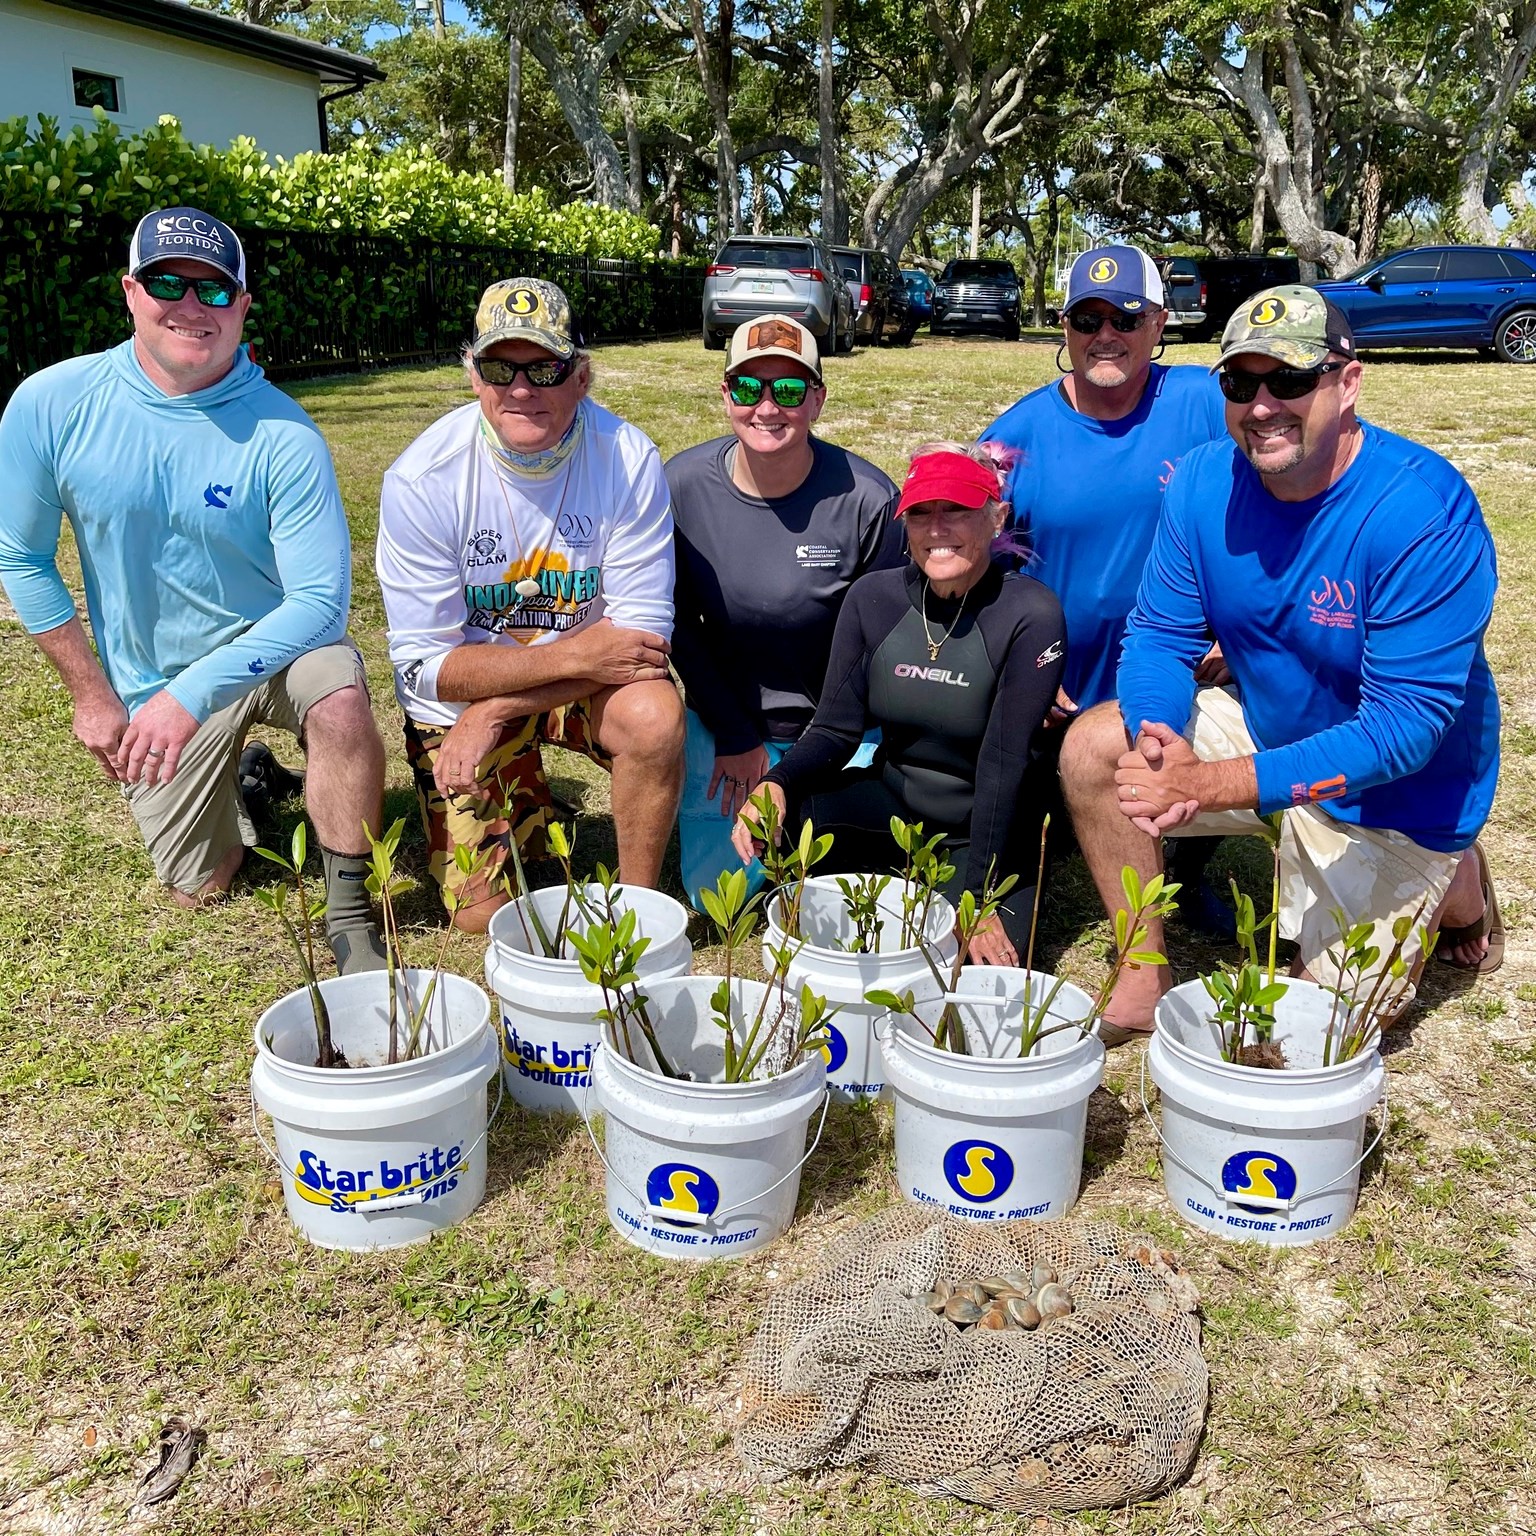 100,000 clams planted in the Indian River Lagoon on Earth Day